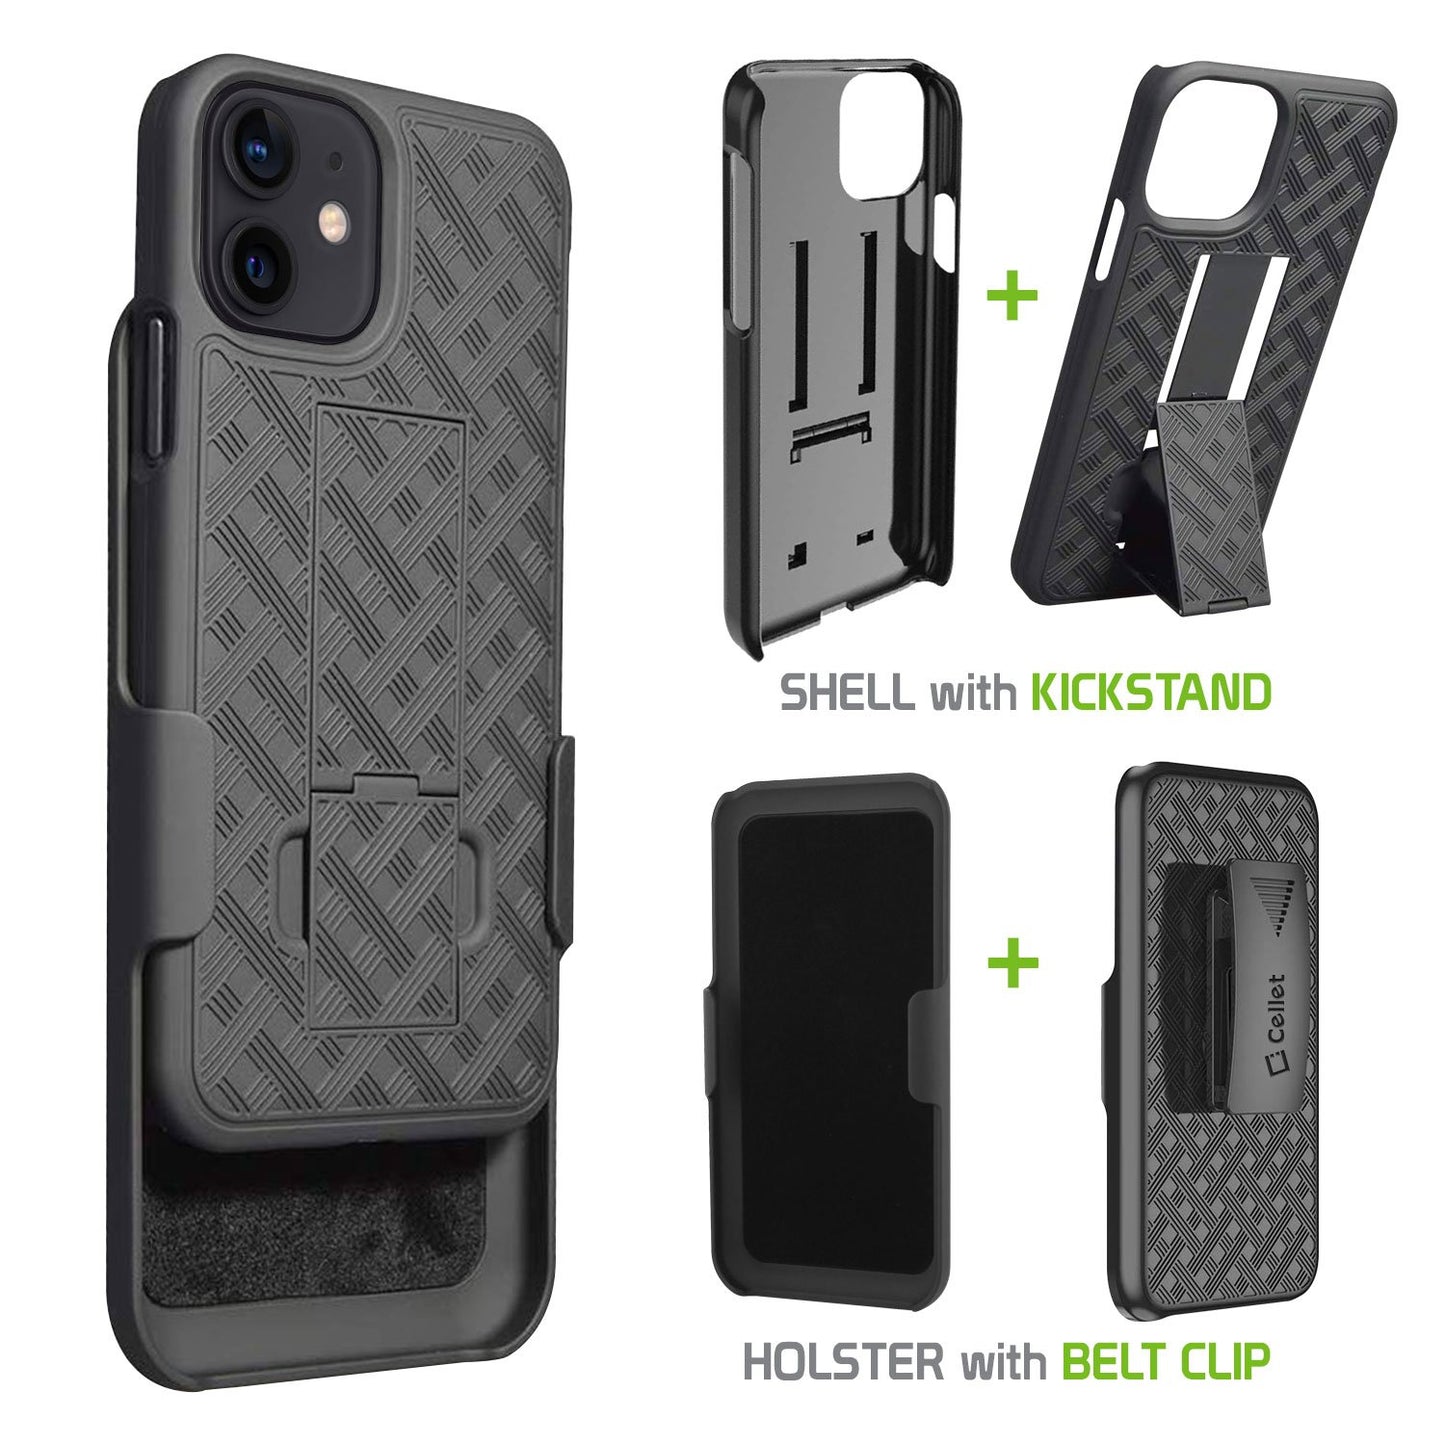 HLIPH12MINI - iPhone 12 Holster mini Holster Case, Shell Holster Kickstand Case with Spring Belt Clip for Apple iPhone 12 Mini – Black – by Cellet